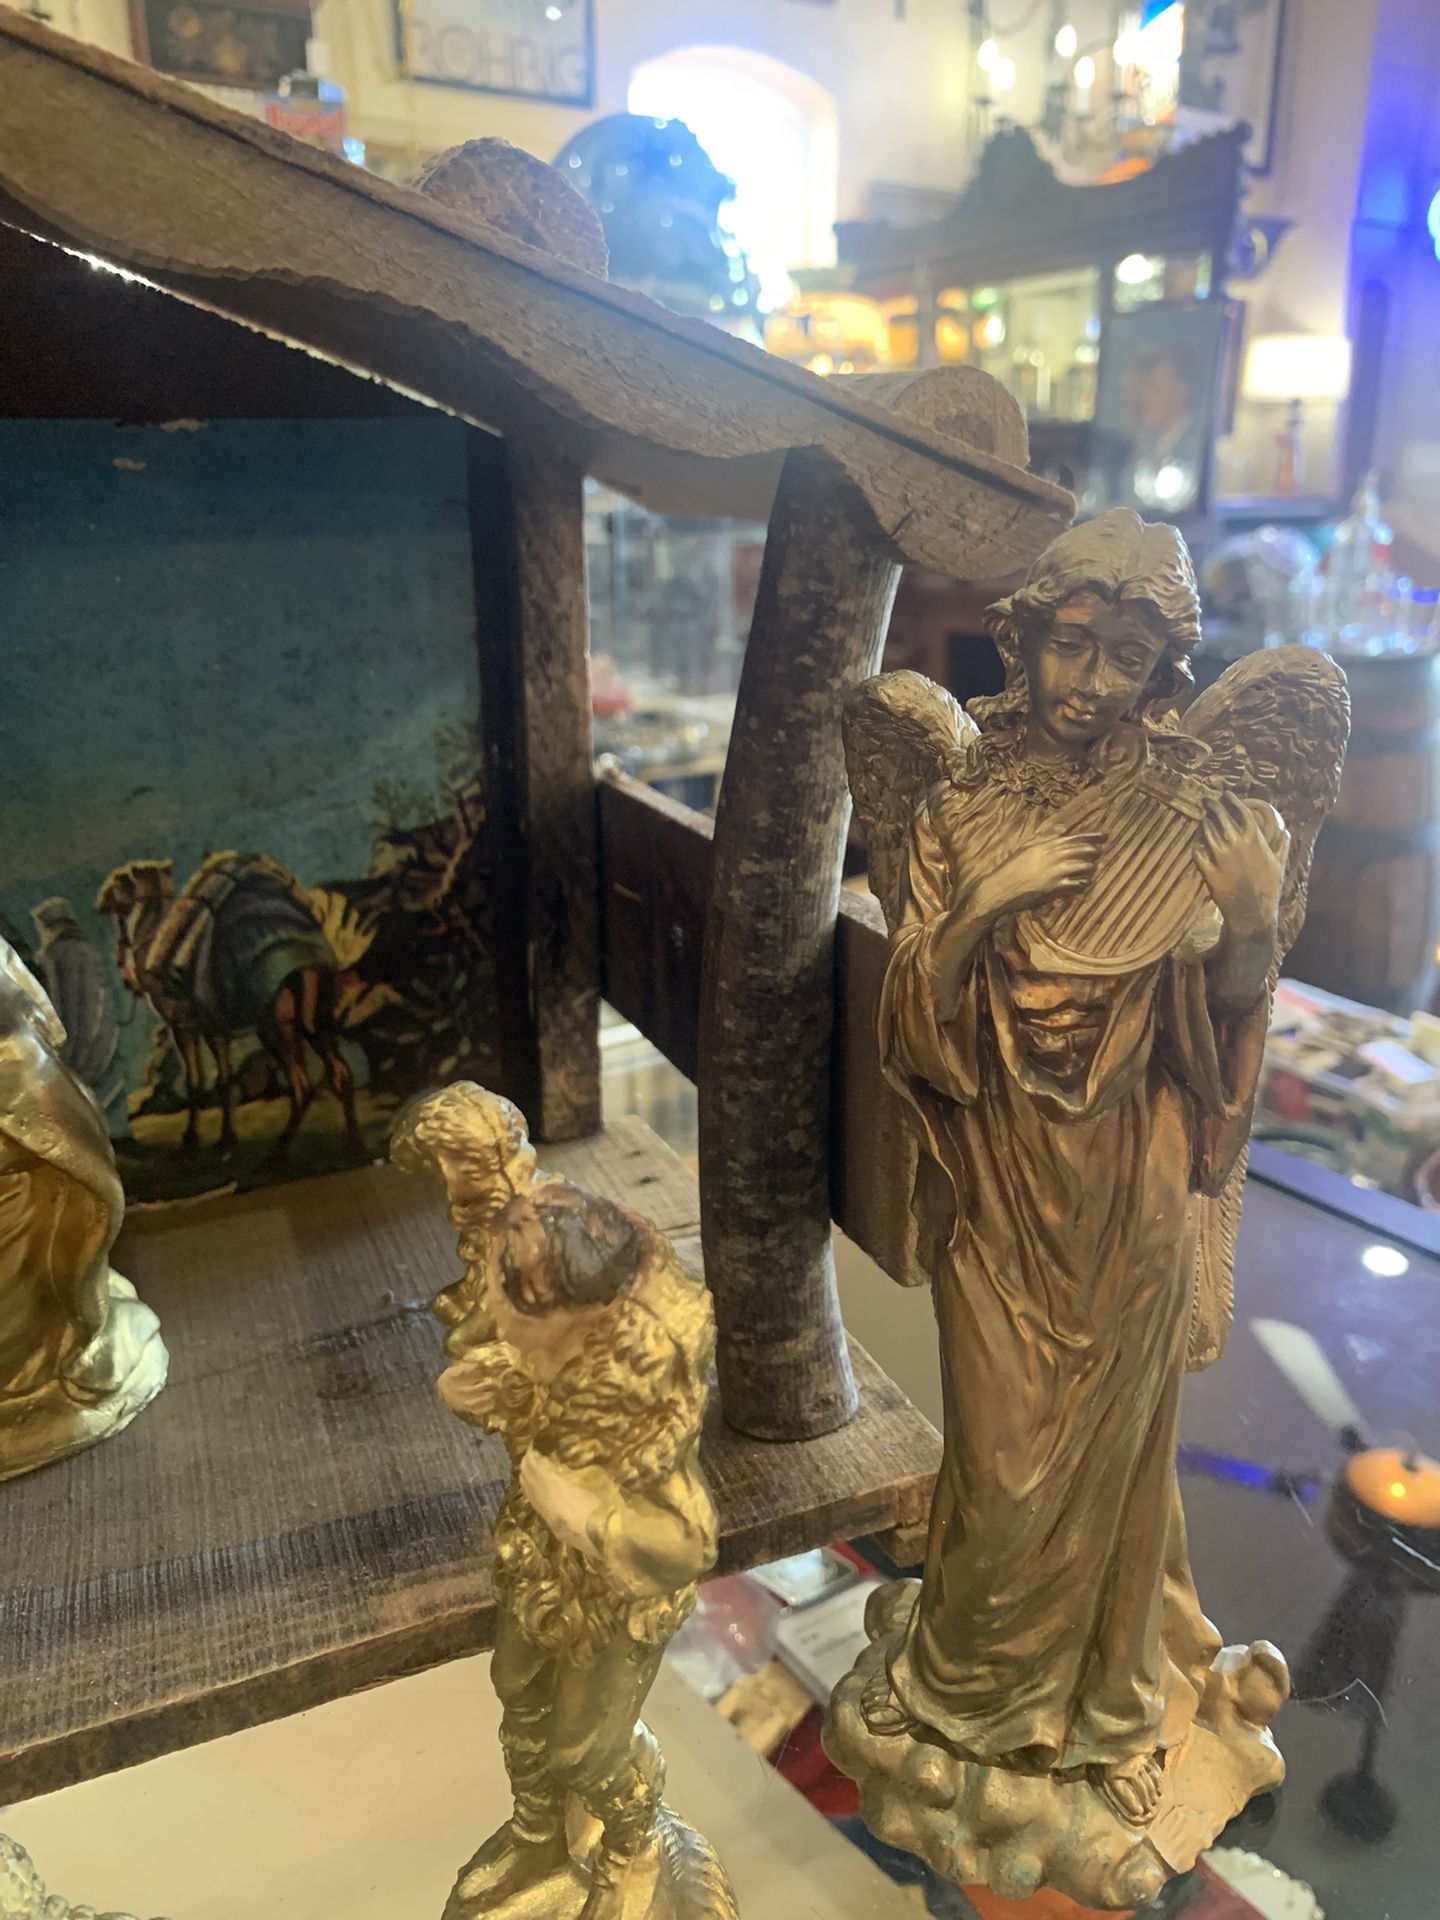 17x8x11 Nativity set manger scene MADE IN ITALY CHRISTMAS.  Johanna at Antiques and More. Located at 316b Main Street Buda. Antiques vintage retro fur